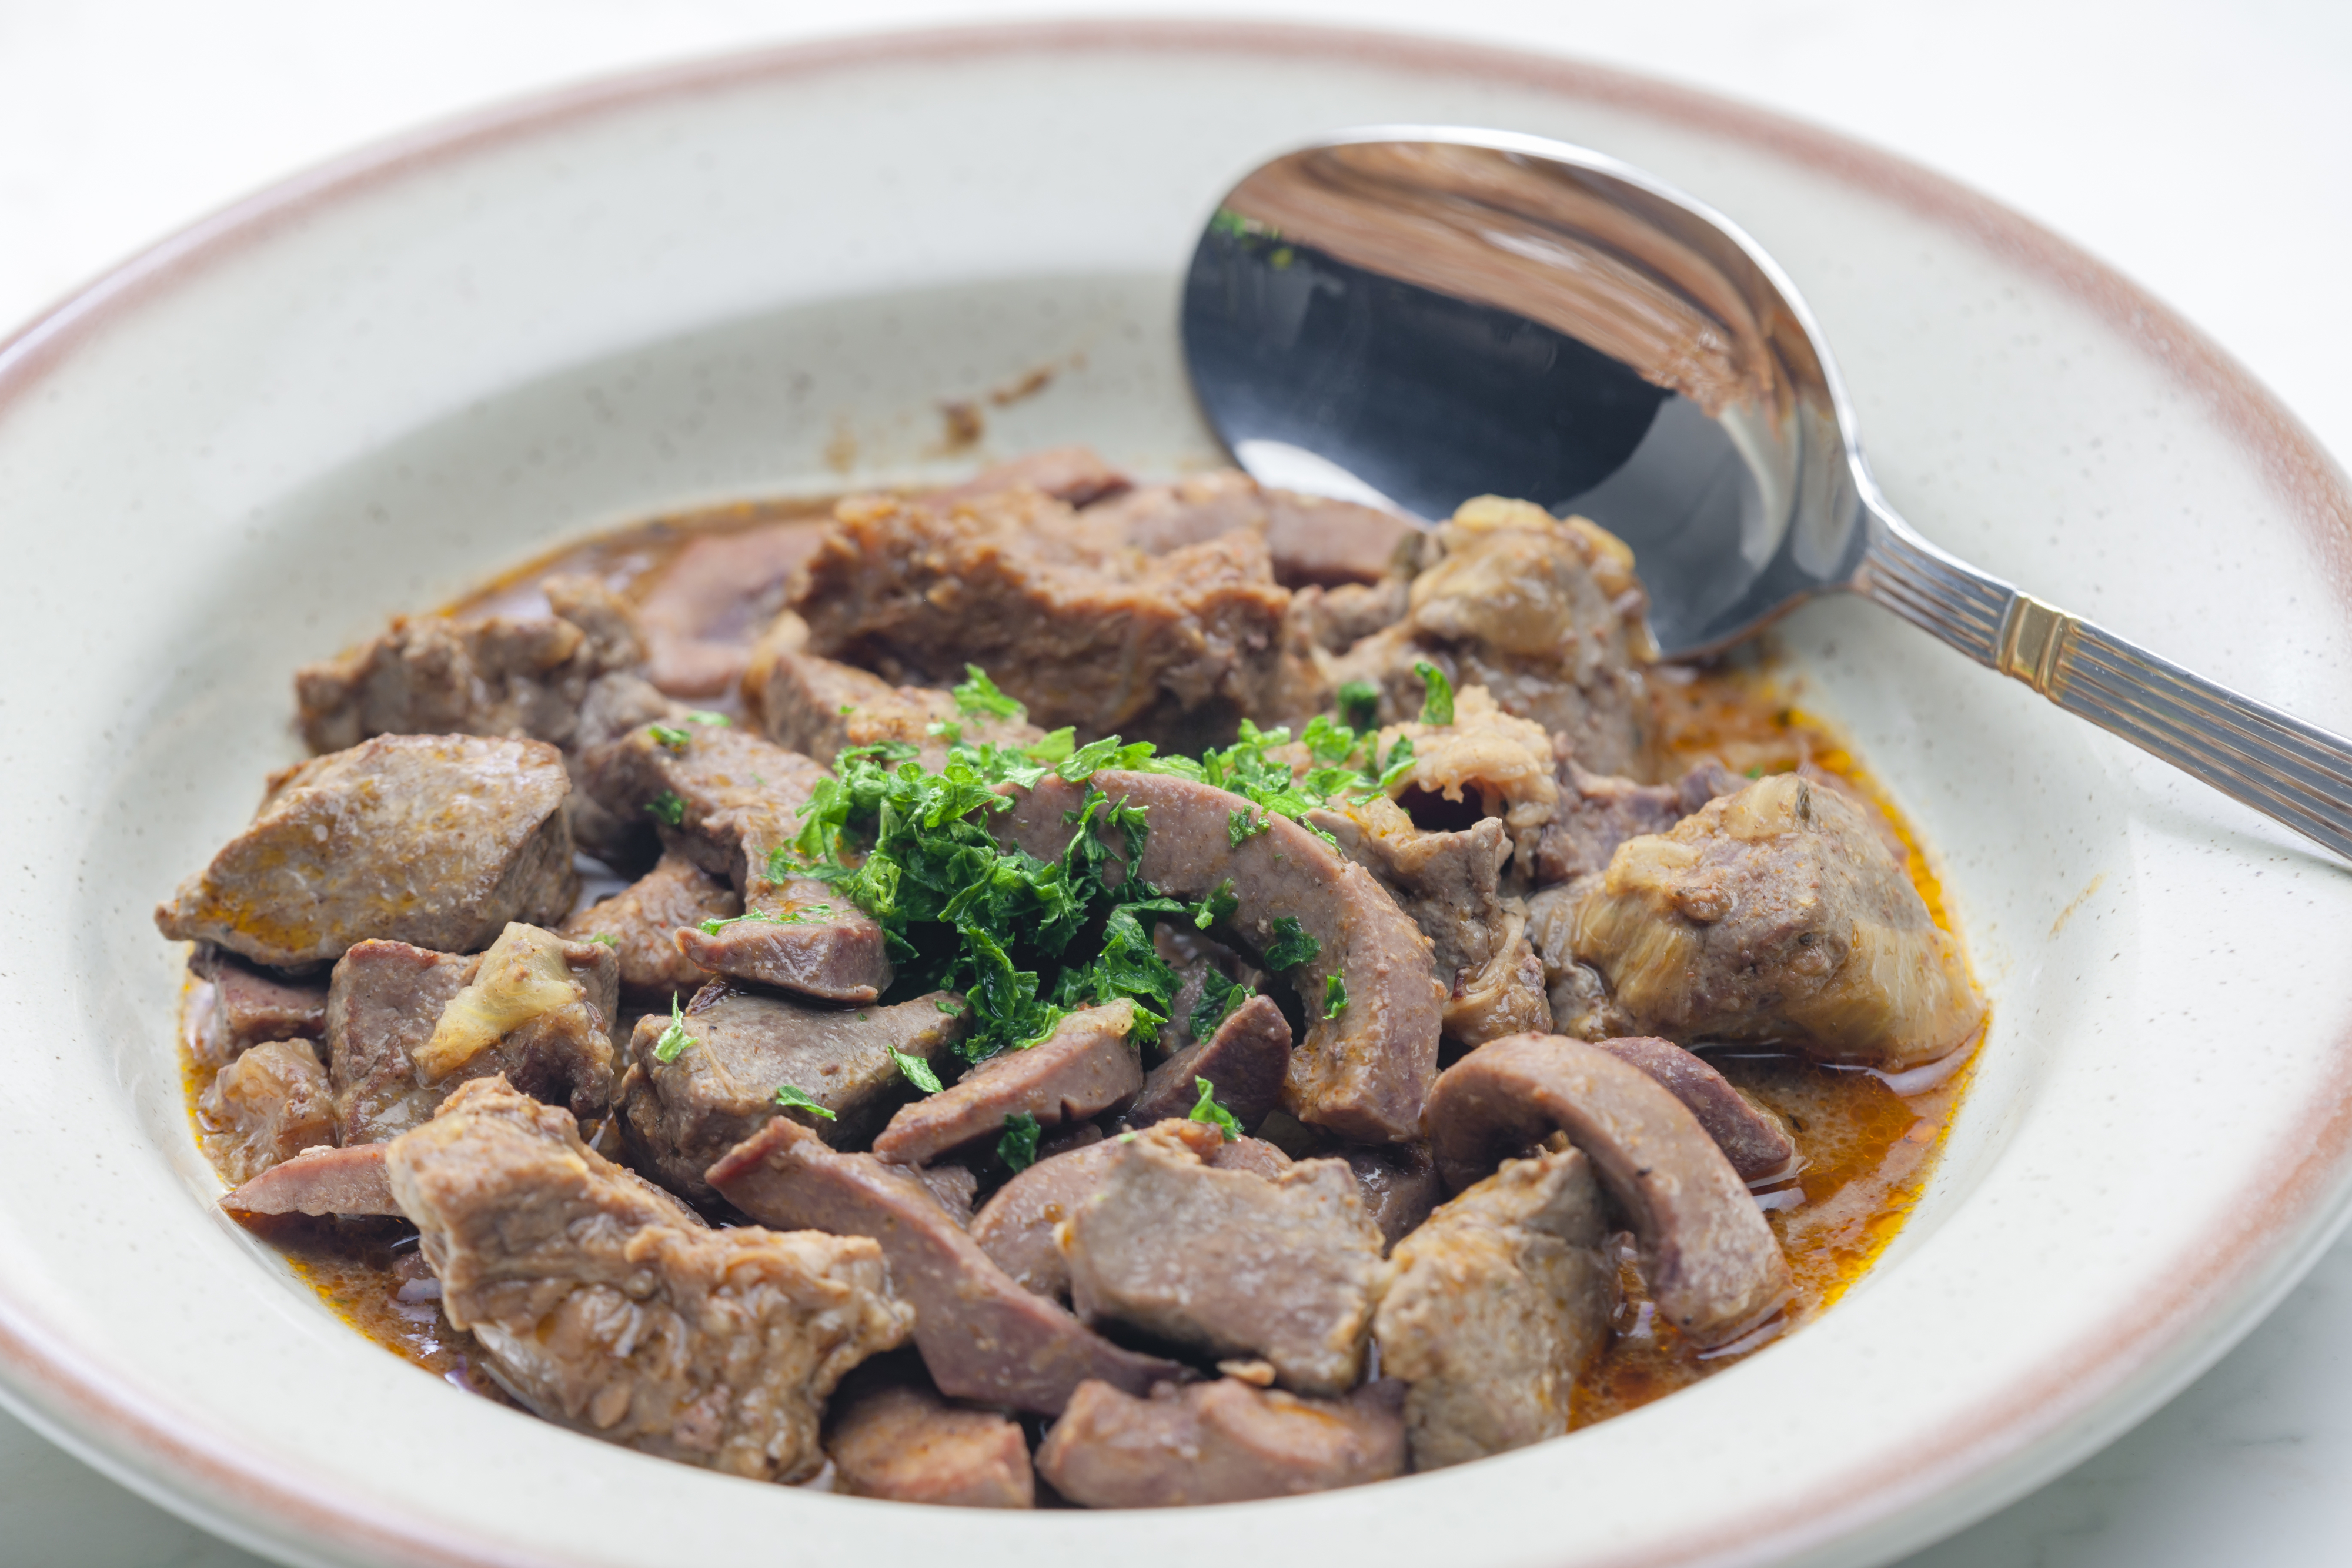 Kidney and beef stew